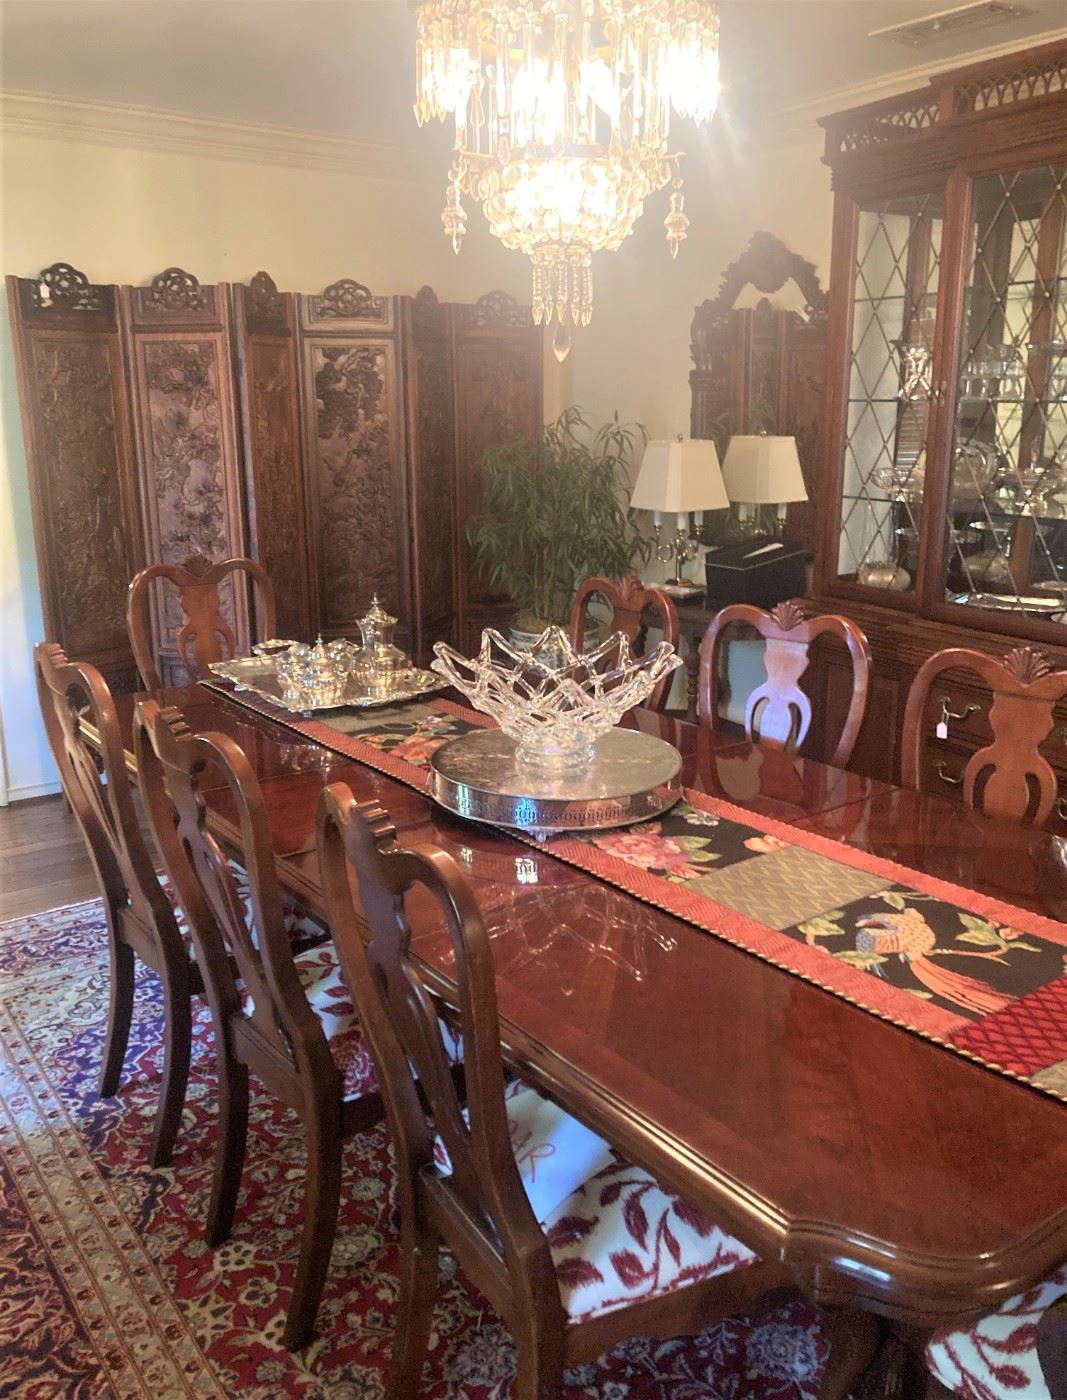 Exceptional dining room table and 8 chairs